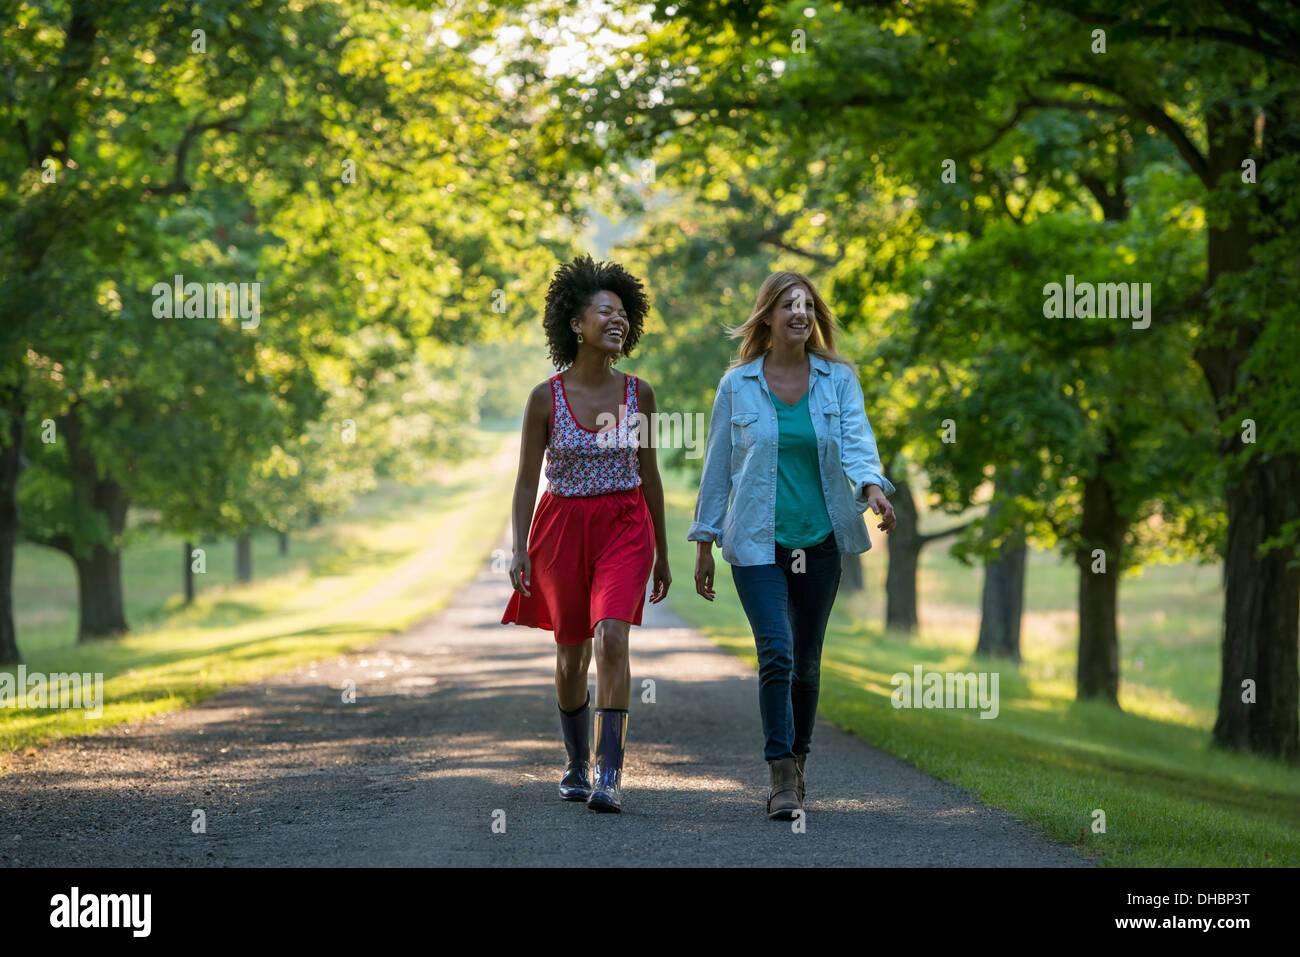 Two women walking down a path lined with trees. Stock Photo